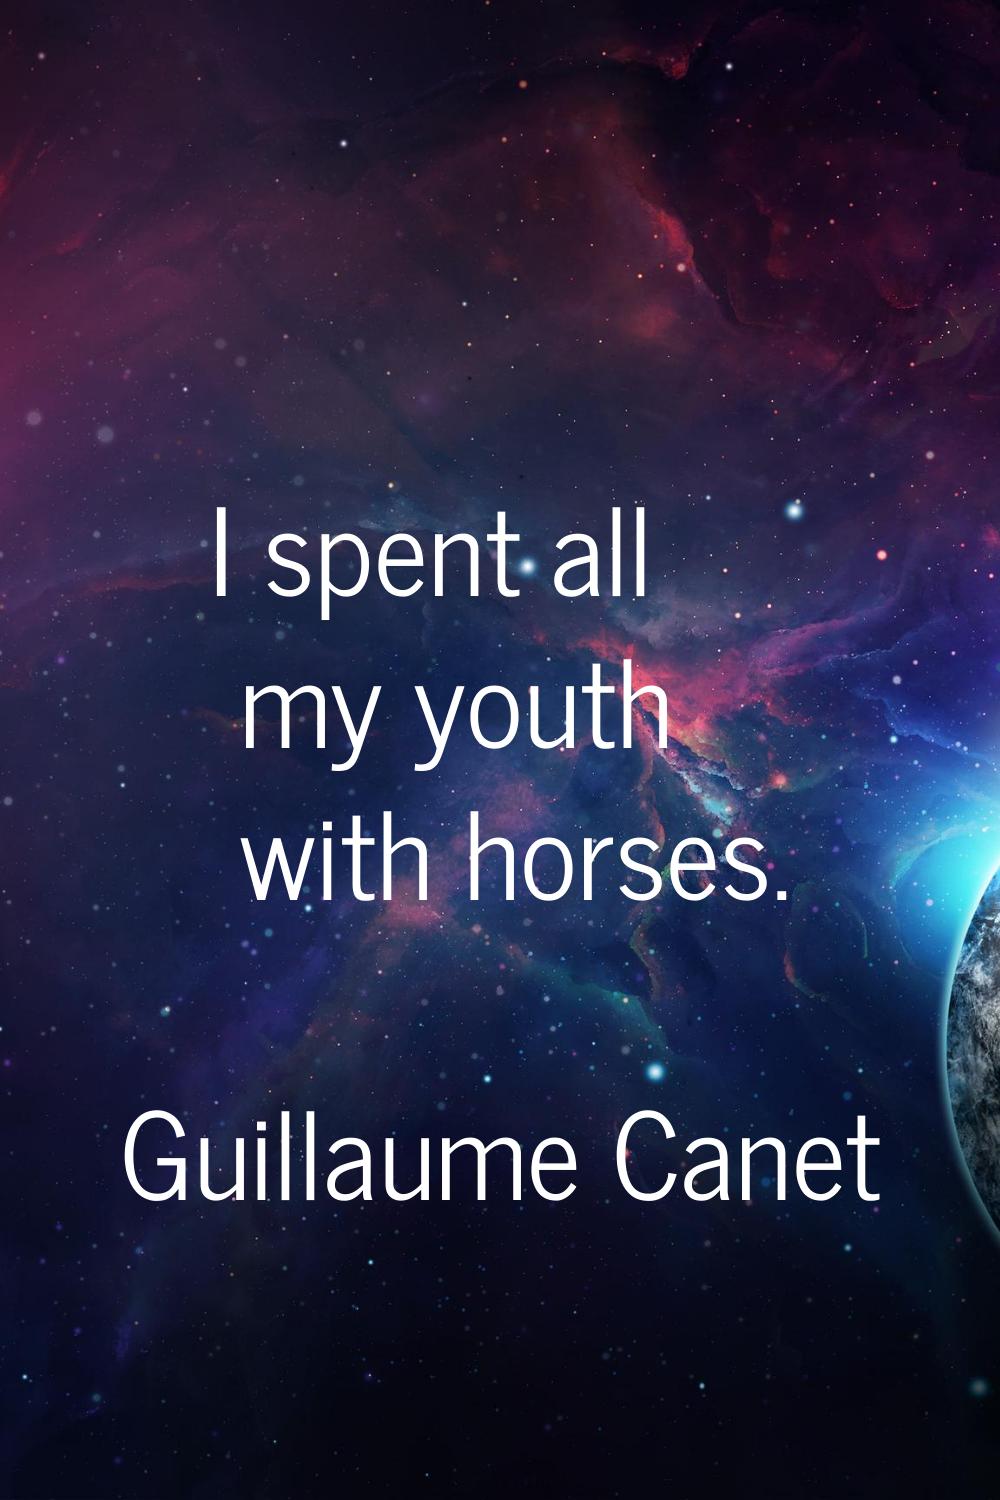 I spent all my youth with horses.